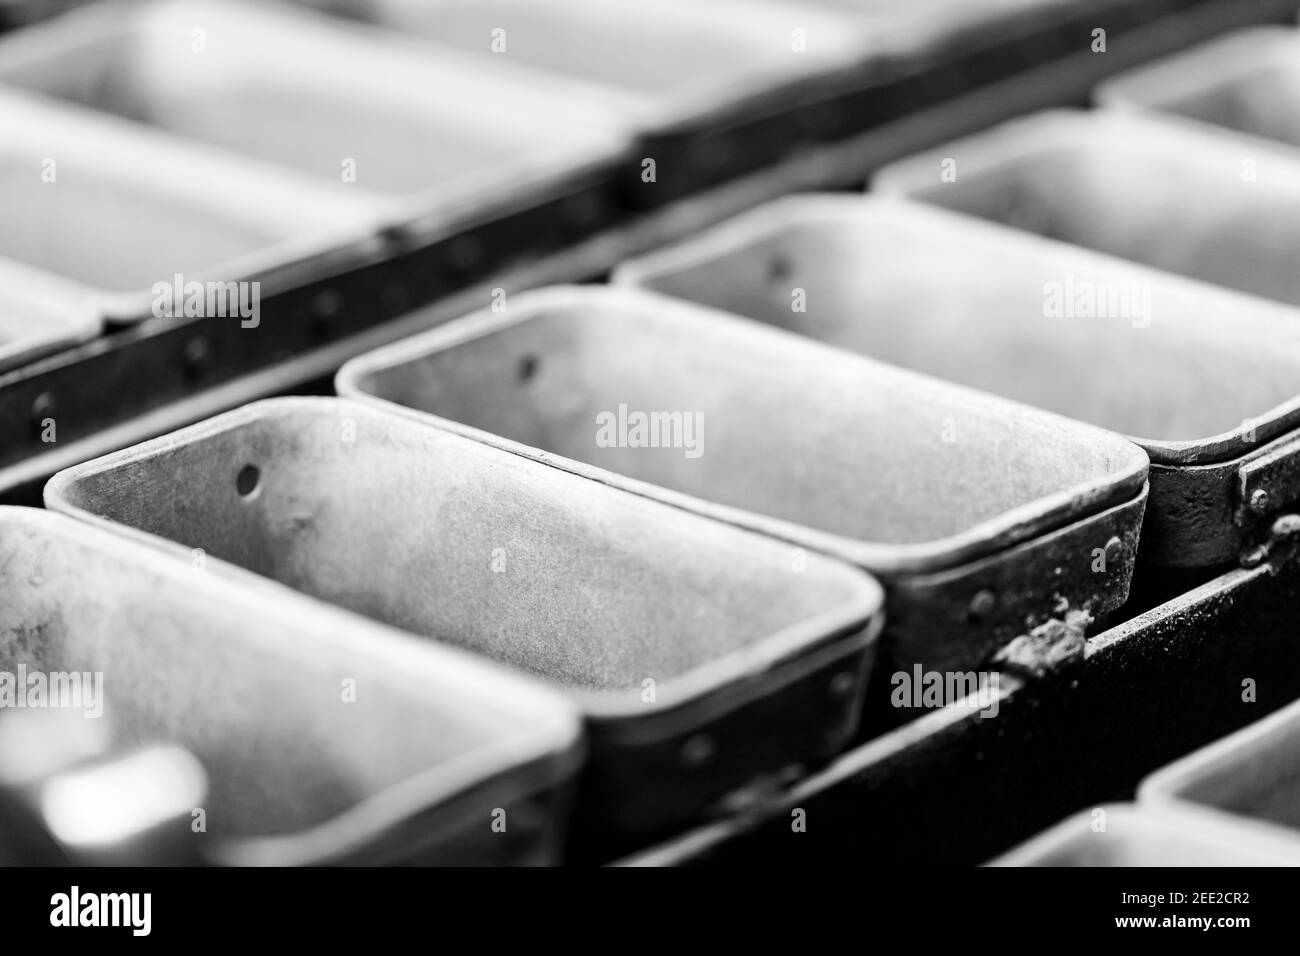 Industrial bakery automated line. Filling metal molds for baking bread. Stock Photo